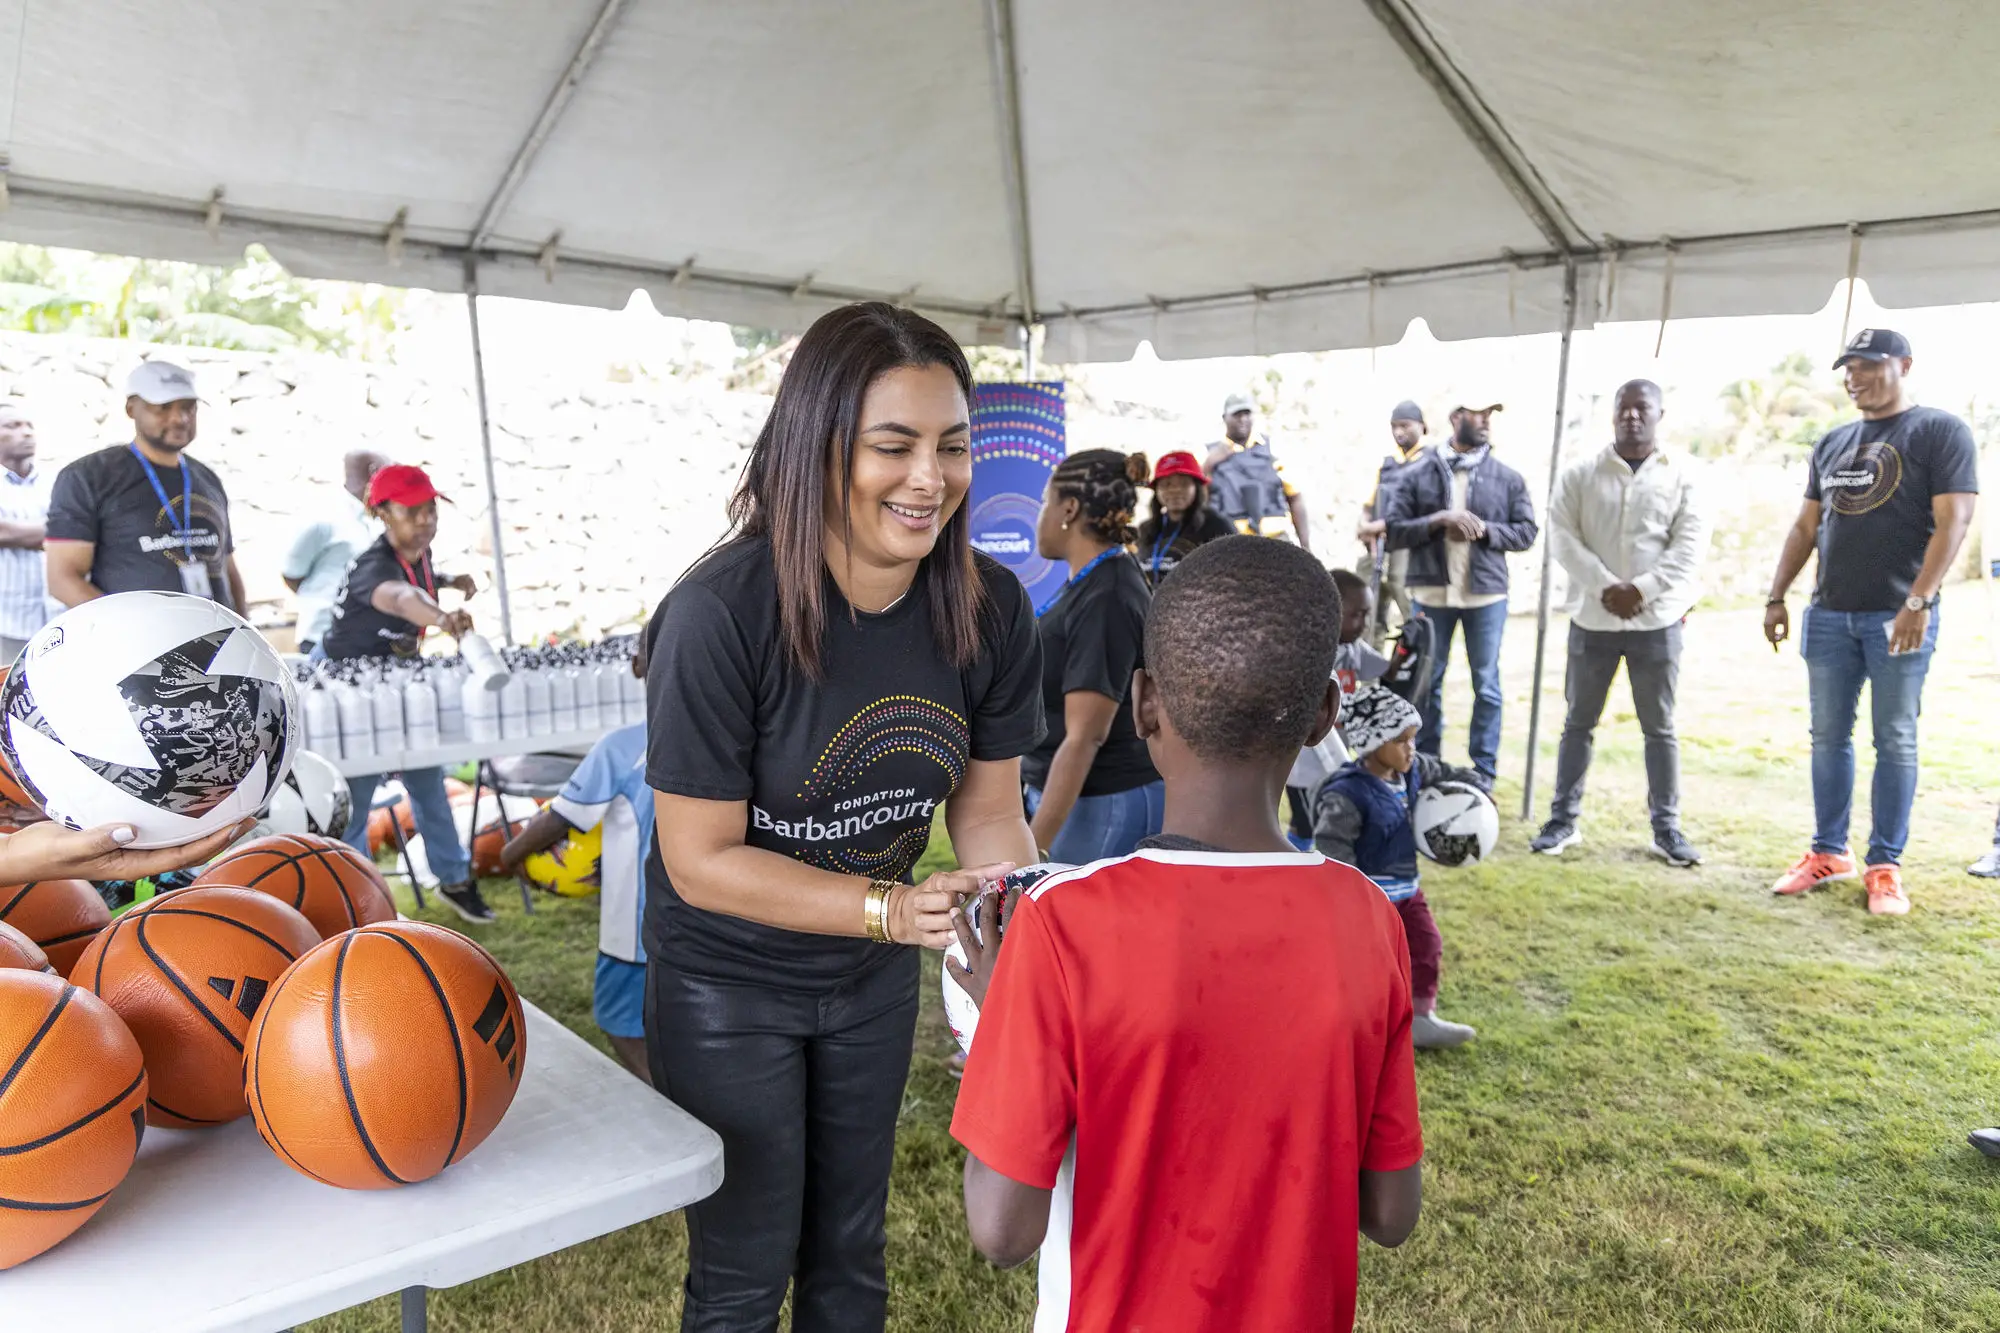 Making a Difference: James Harden's Impact on Children in Haiti